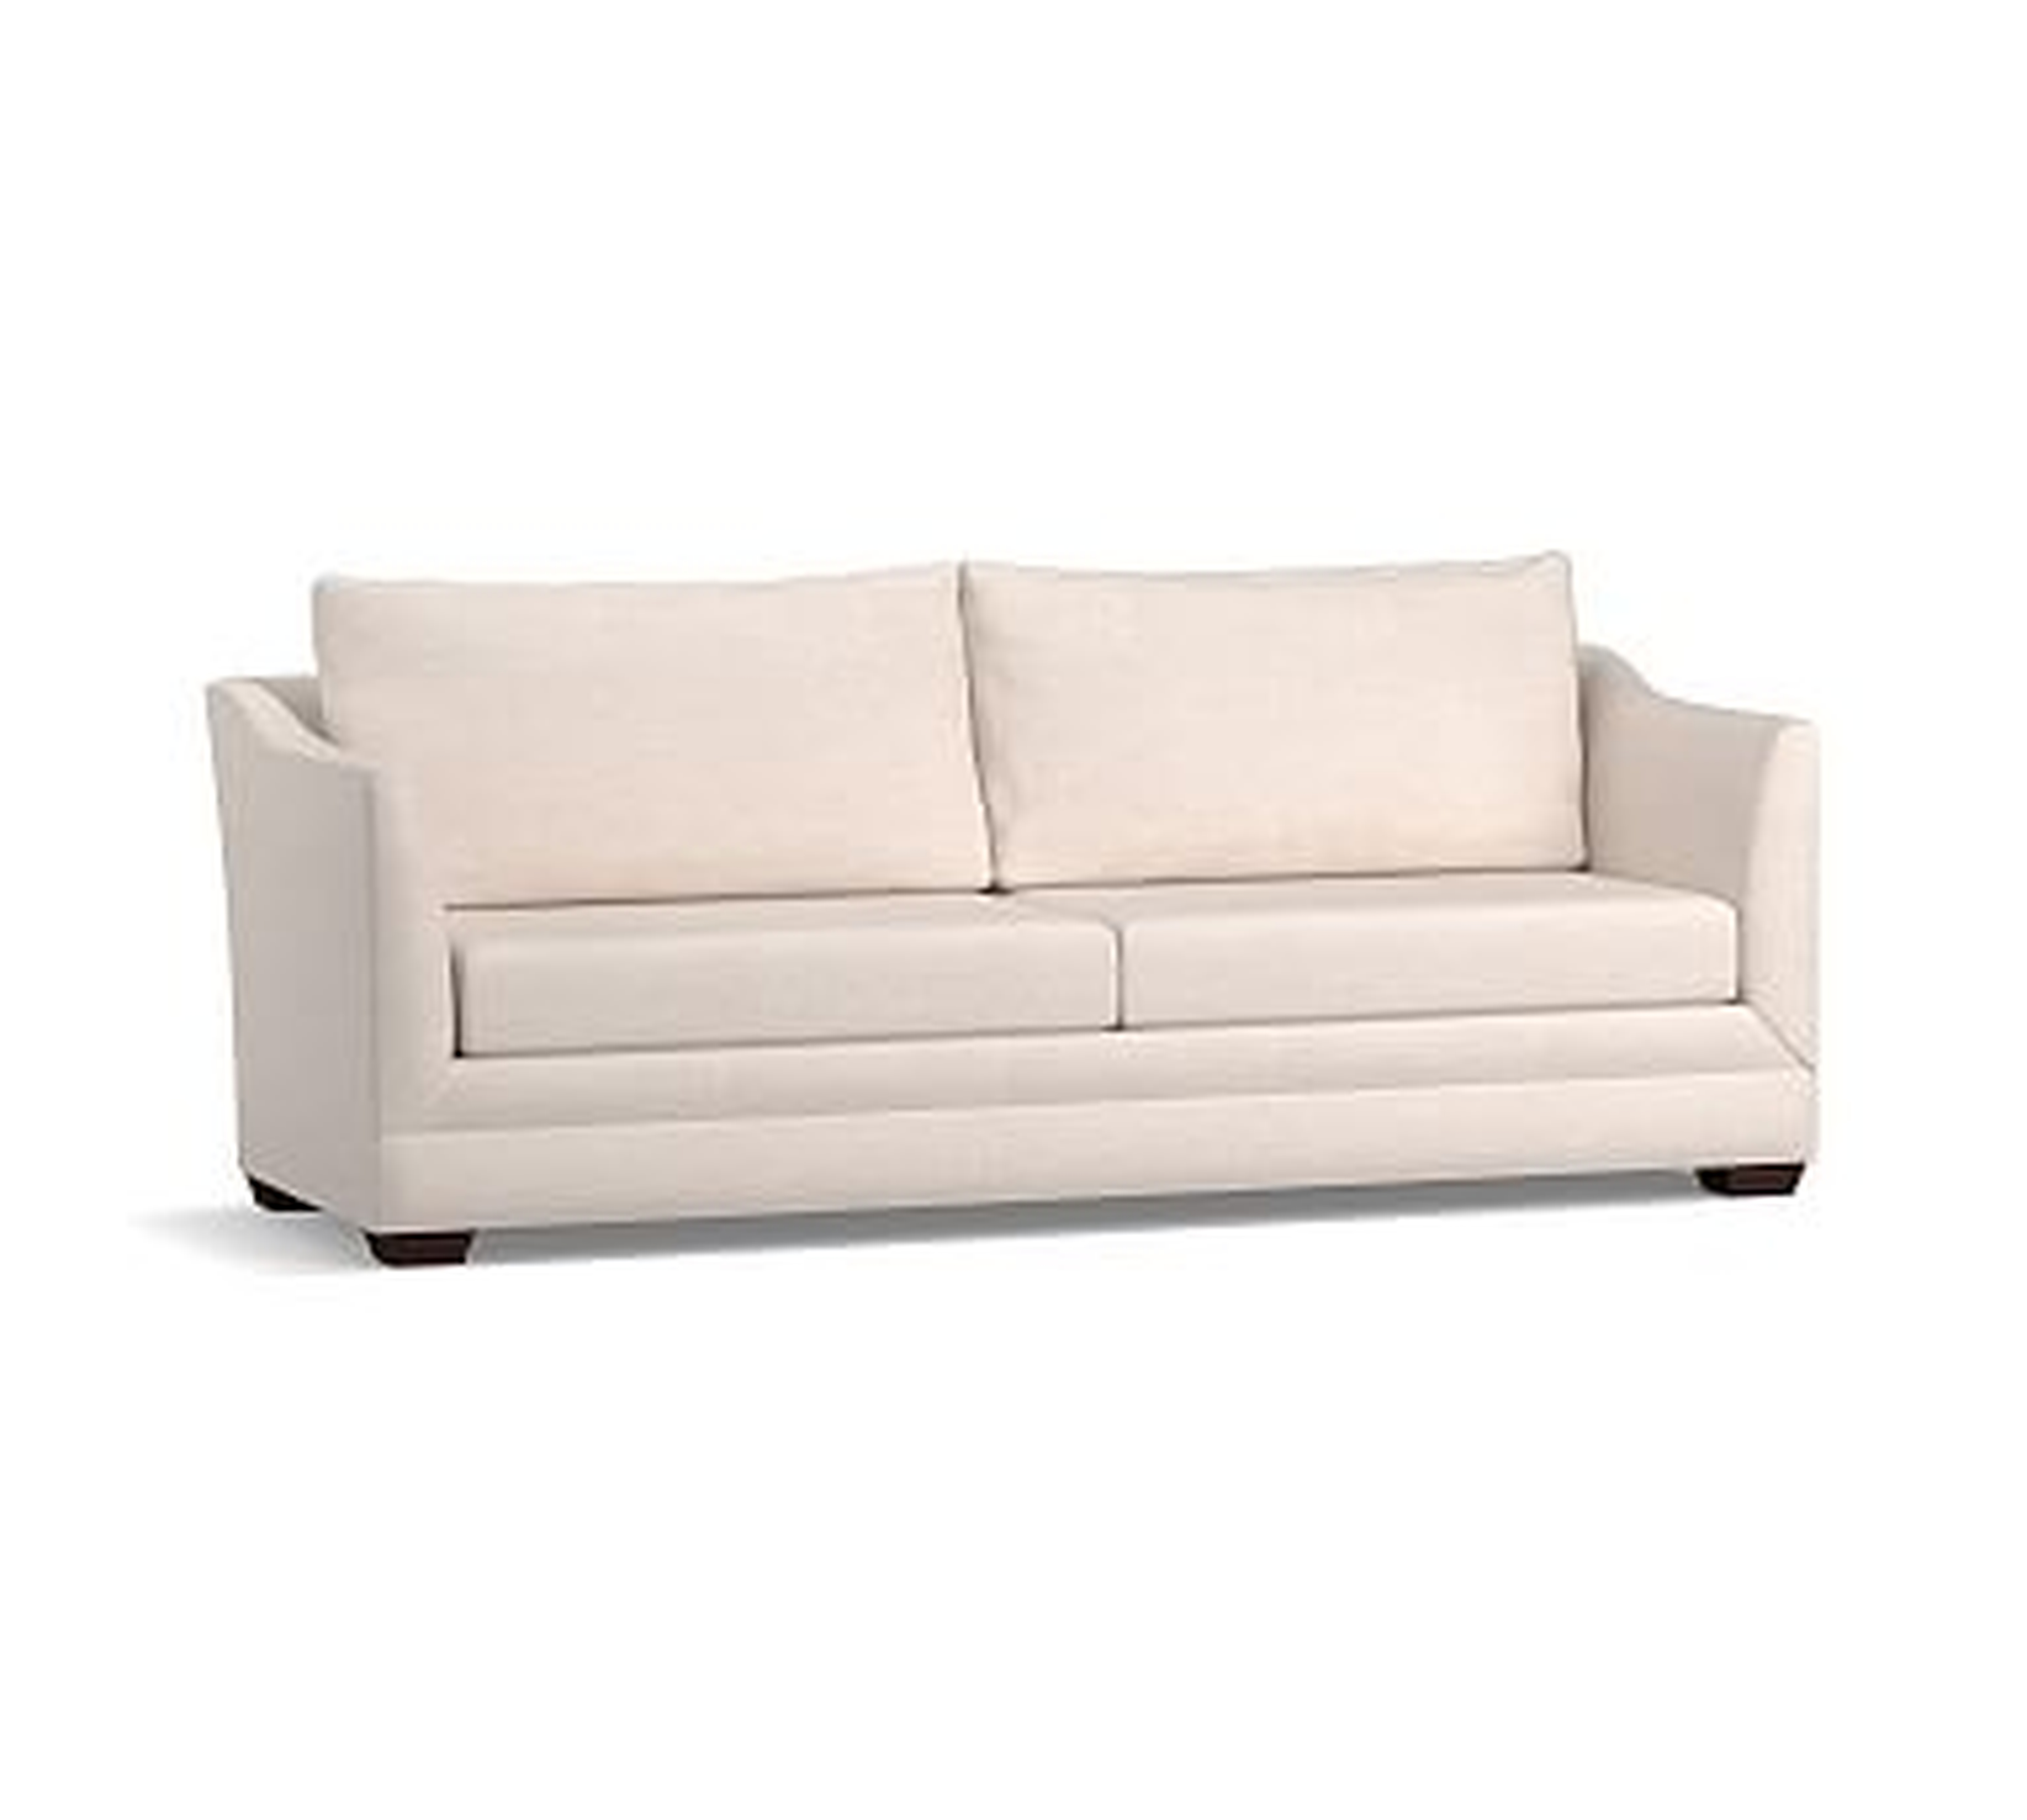 Celeste Upholstered Grand Sofa 86", Polyester Wrapped Cushions, Performance Twill Warm White - Pottery Barn